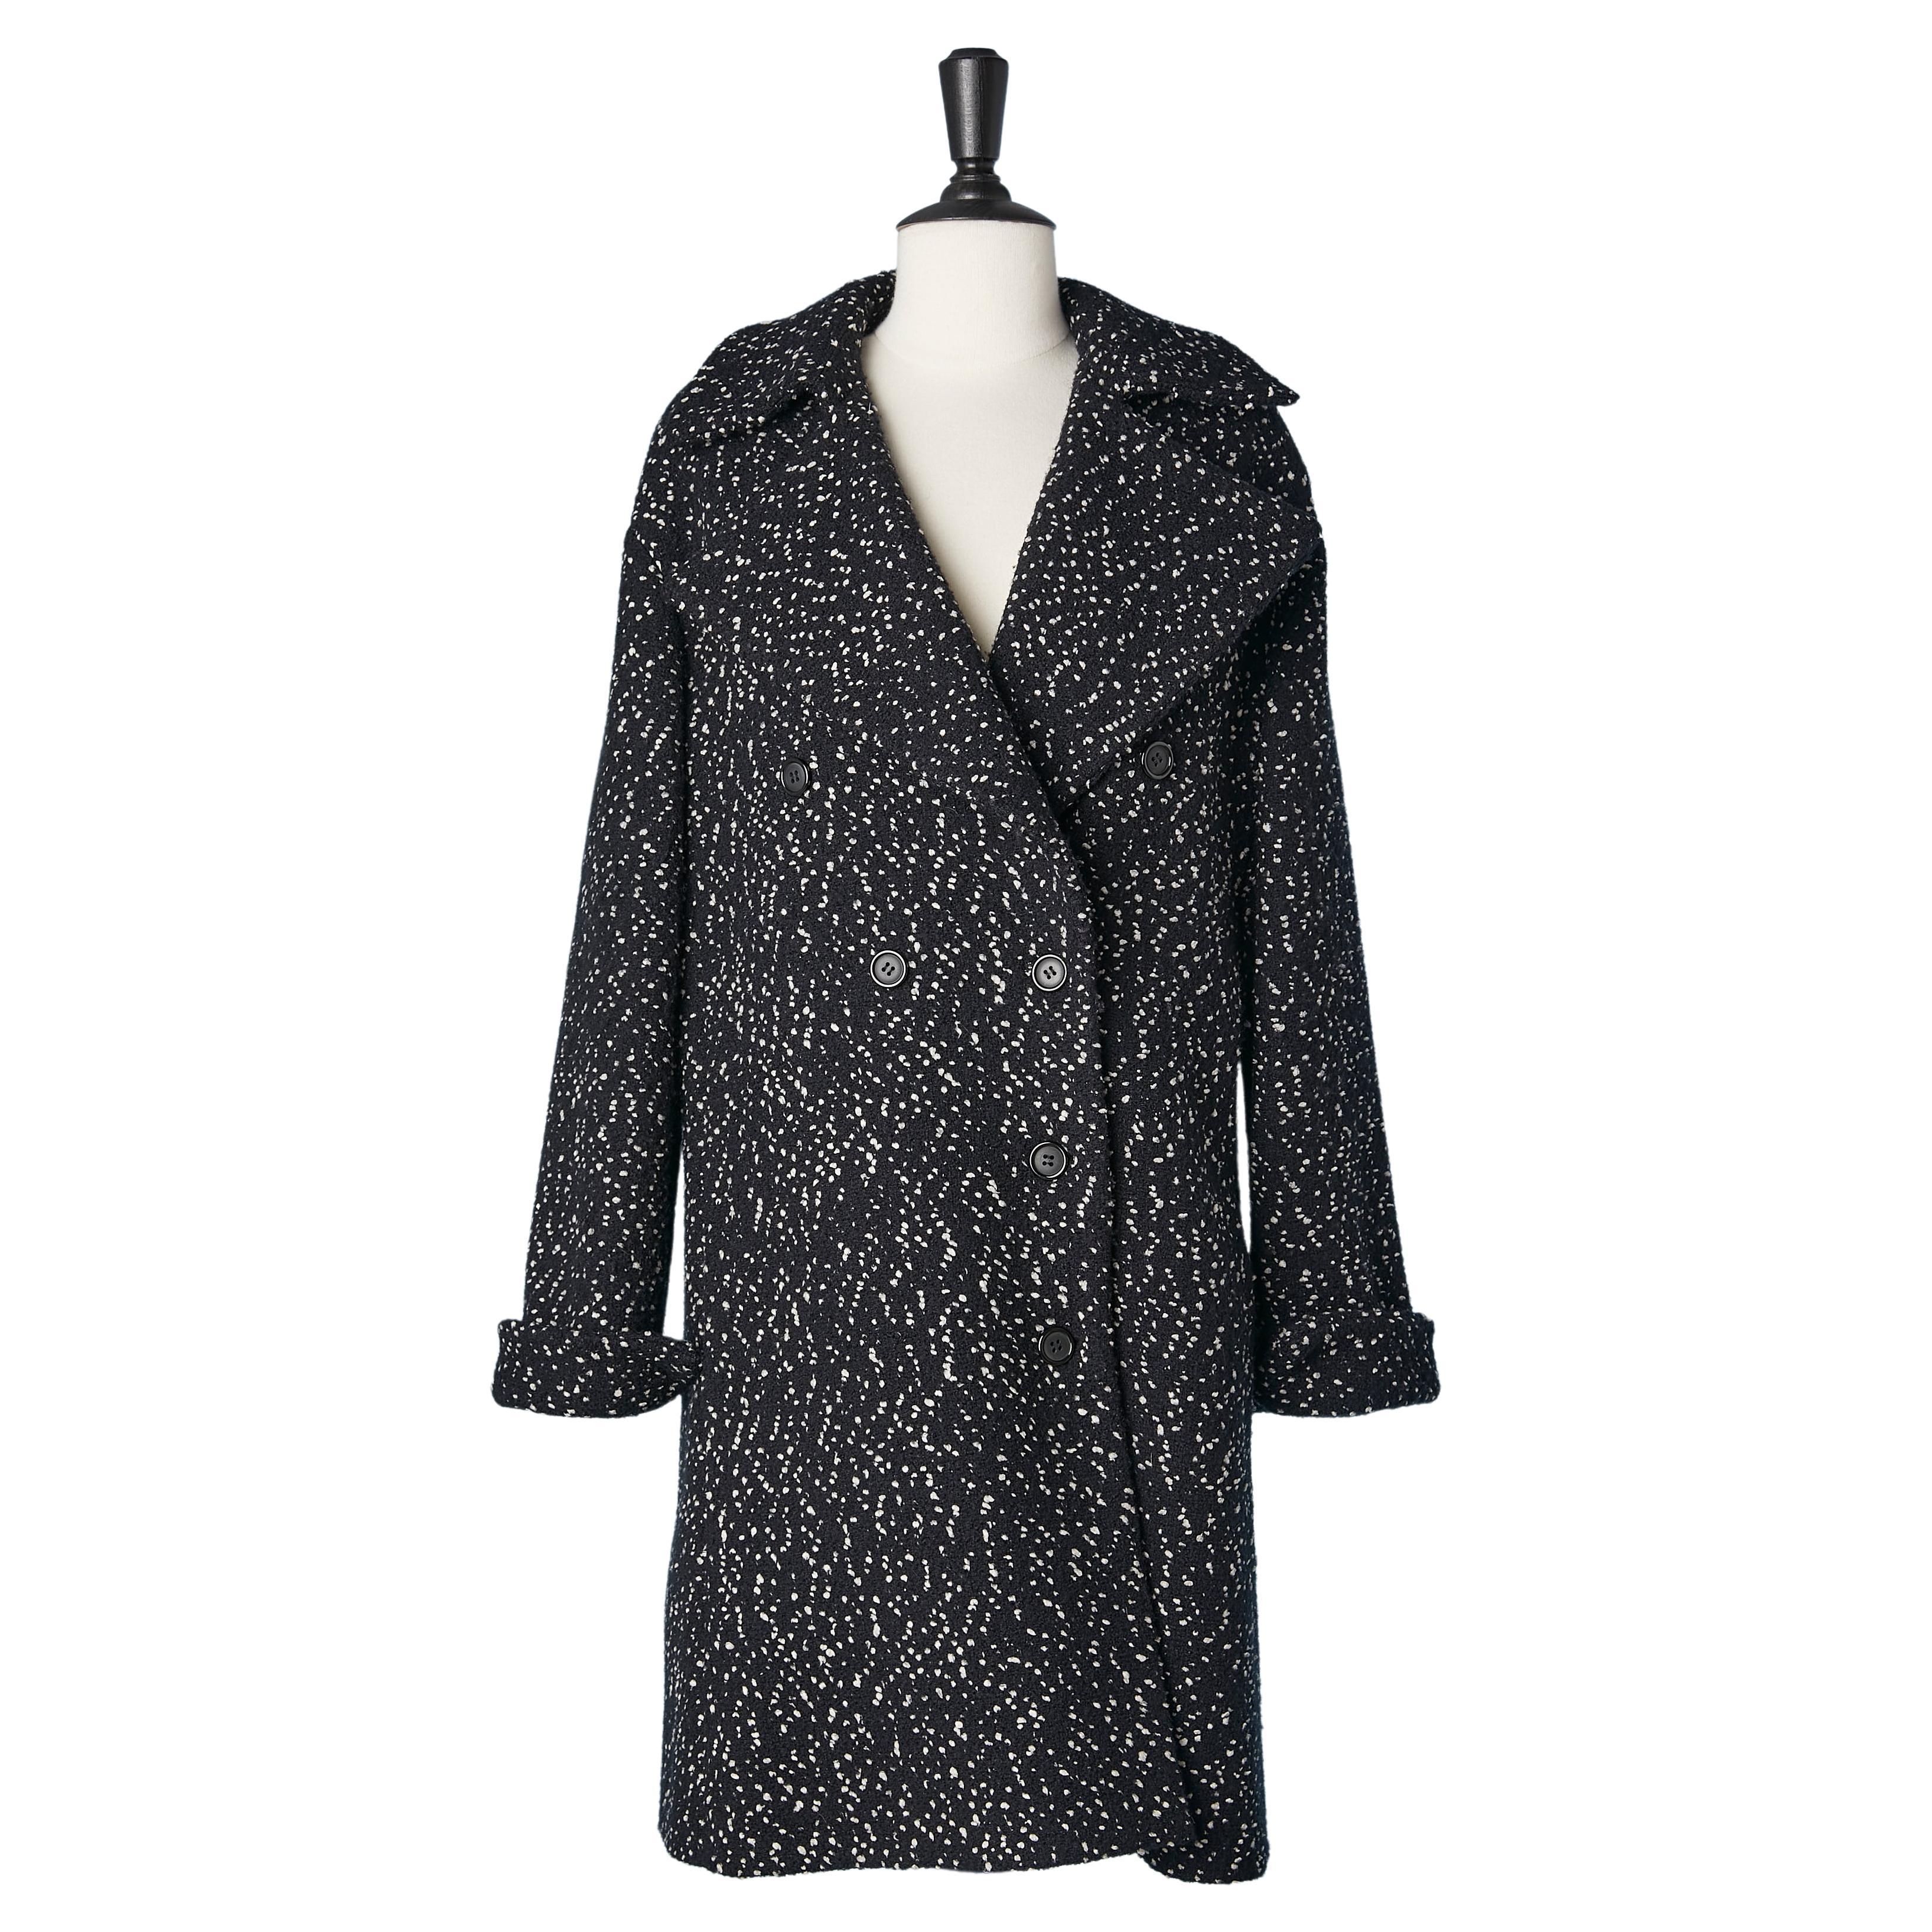 Double-breasted  wool coat black speckled white Céline Circa 2000 For Sale